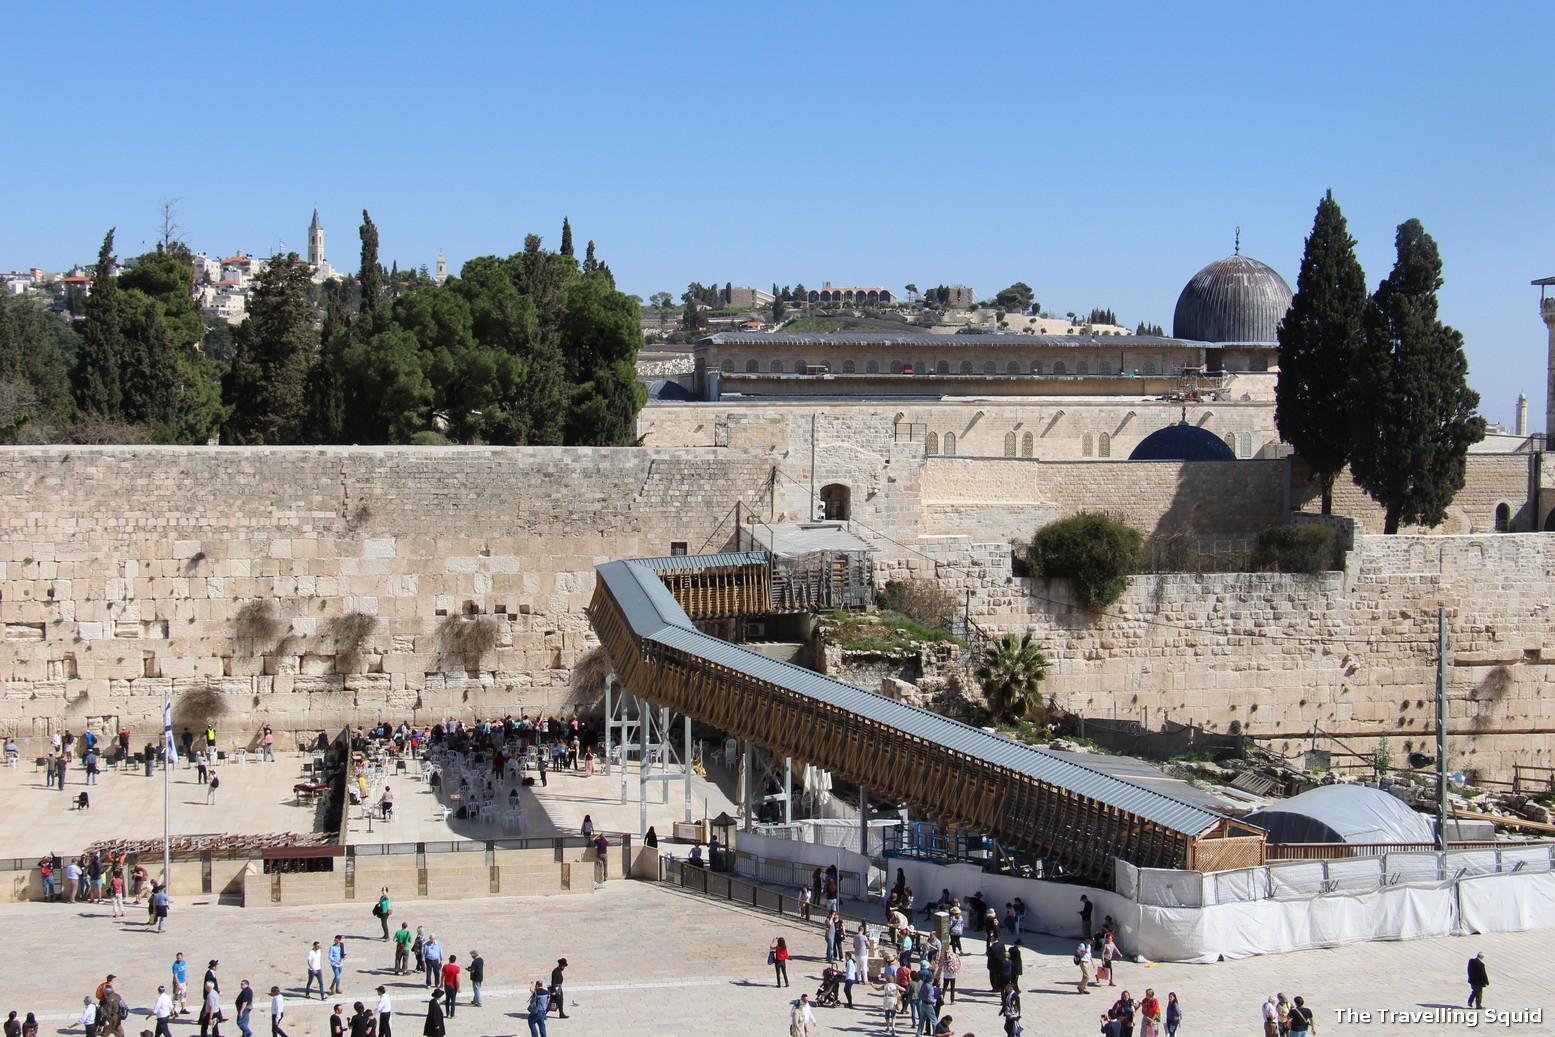 Visiting the Western Wall in Jerusalem - A Must See - The Travelling Squid